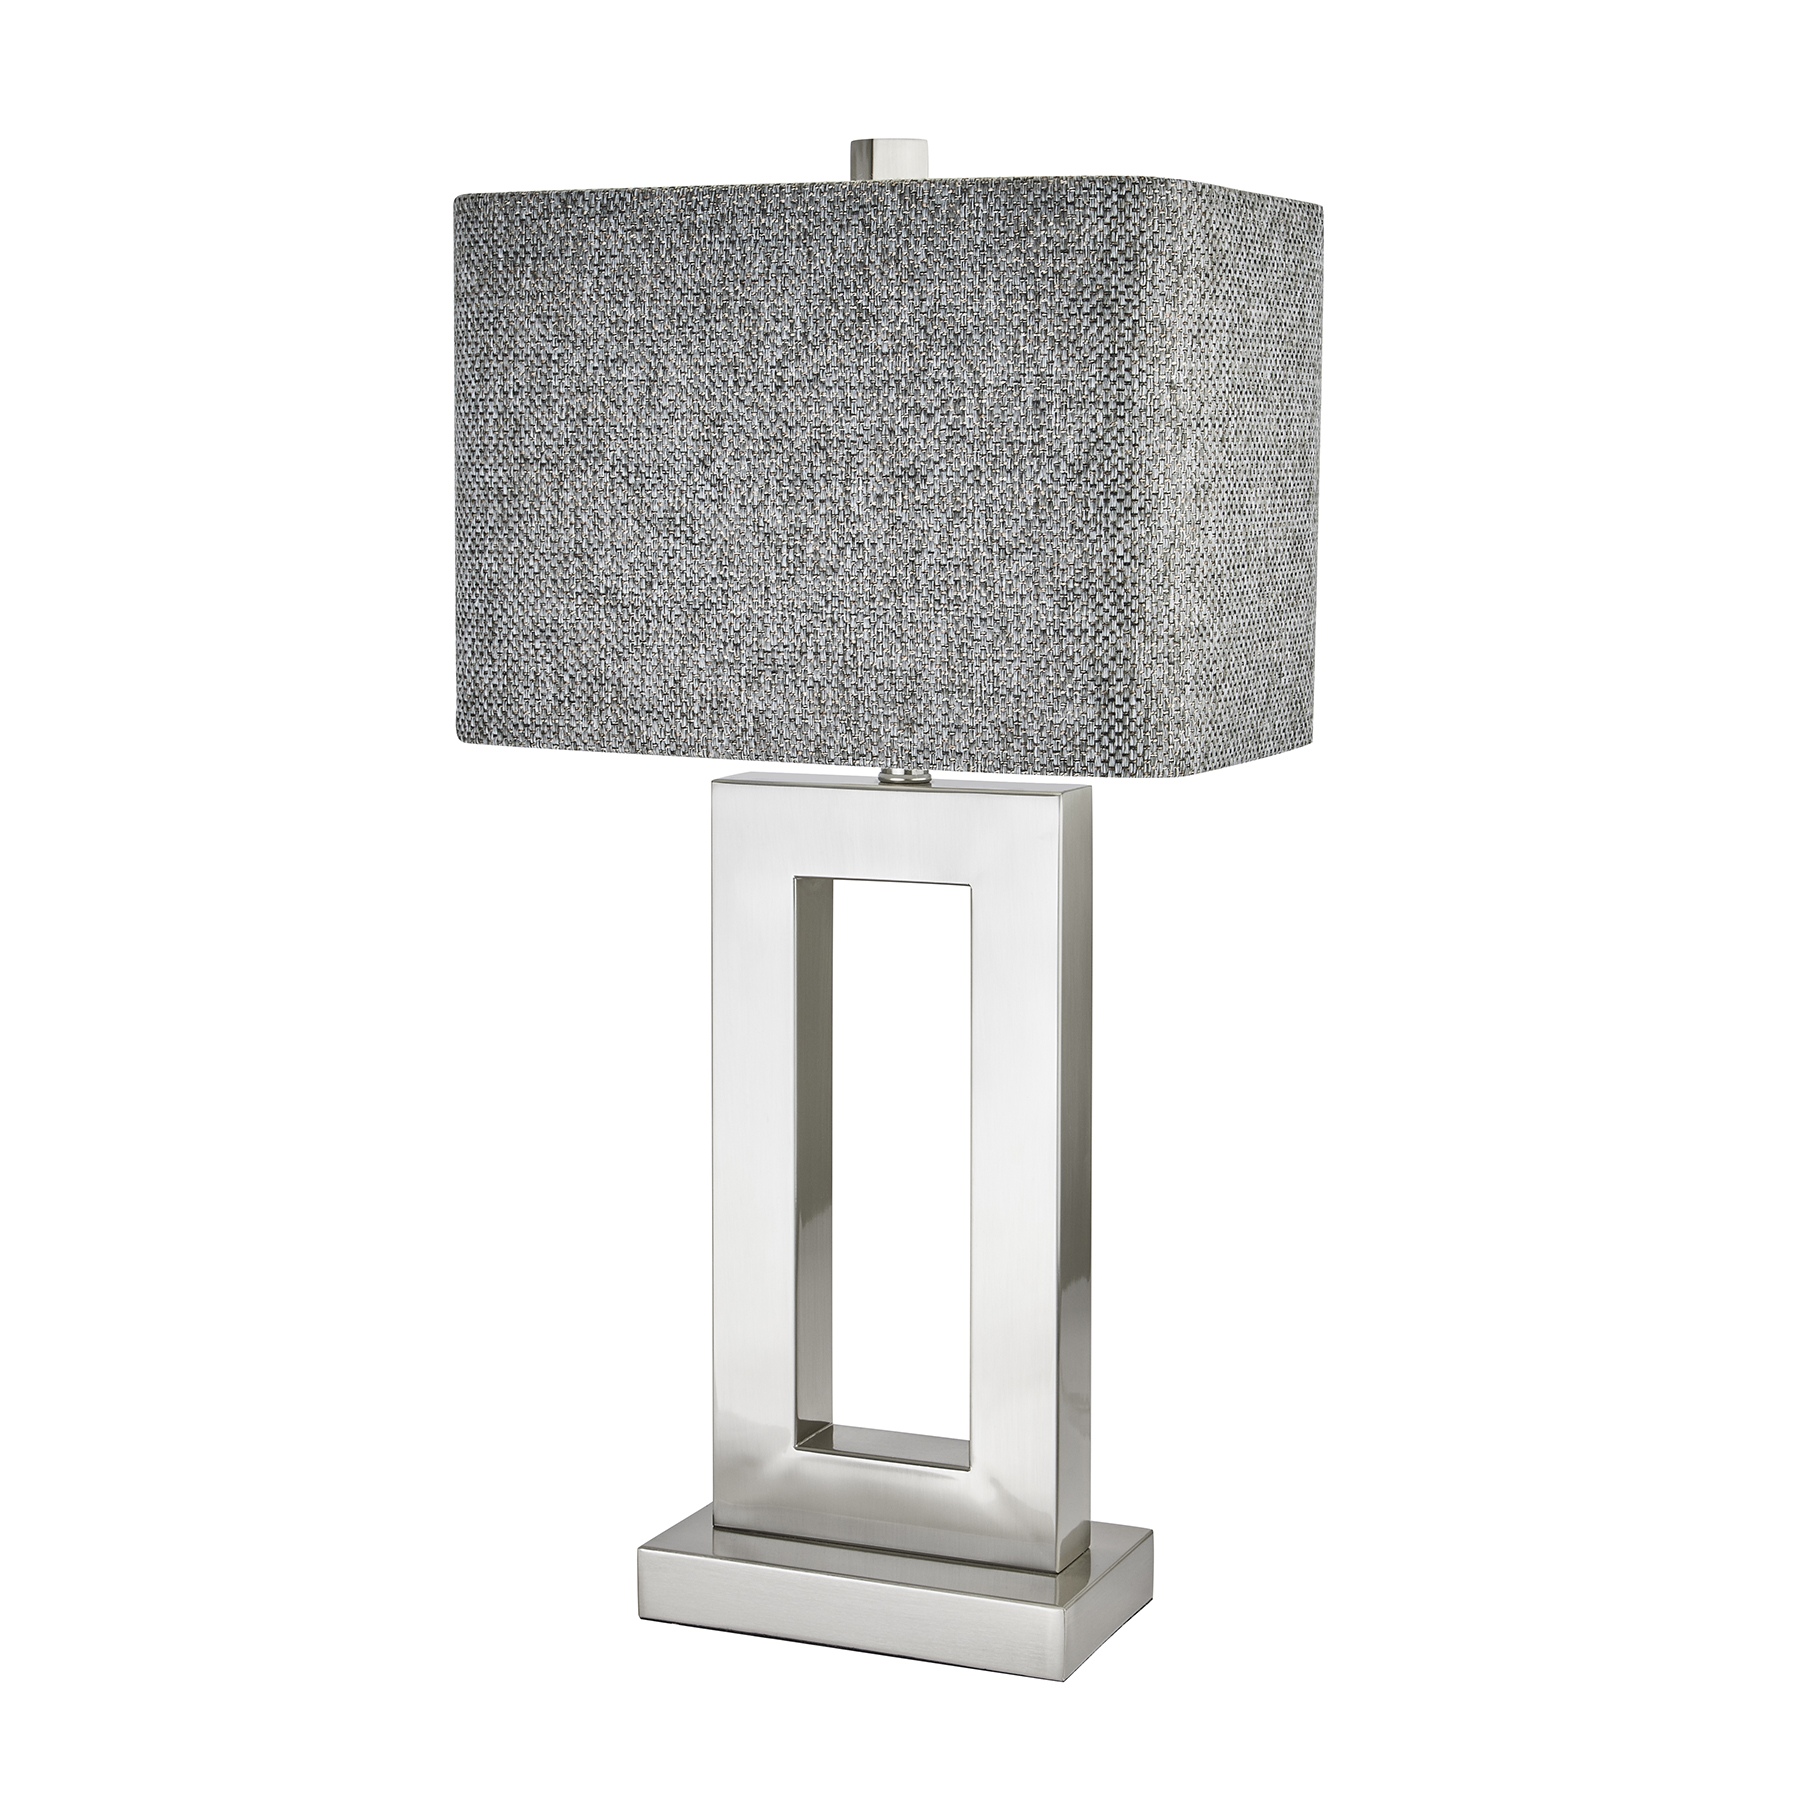 Baleria Chrome Lamp With Woven Shade - Image 1